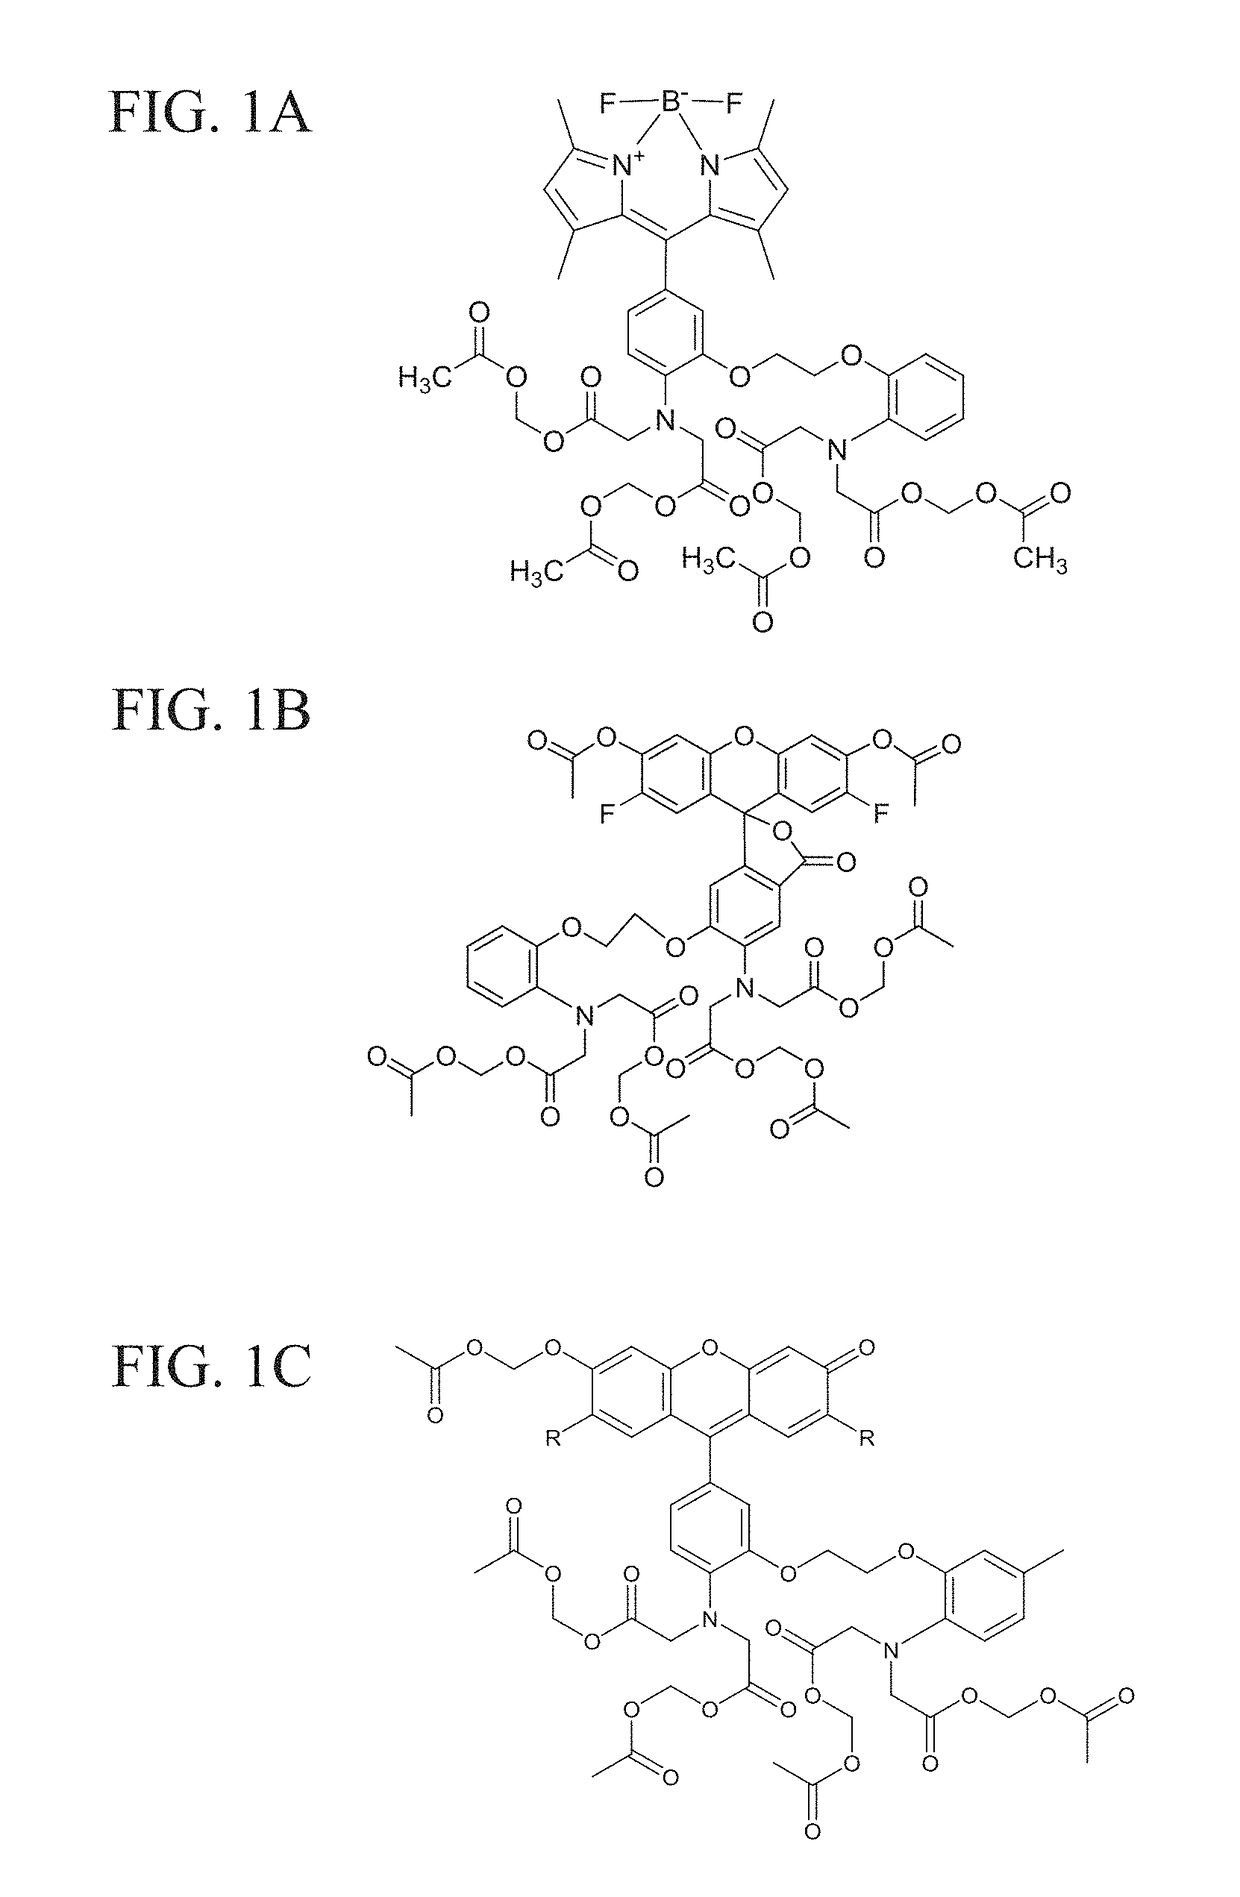 Fluorogenic calcium ion indicators and methods of using the same